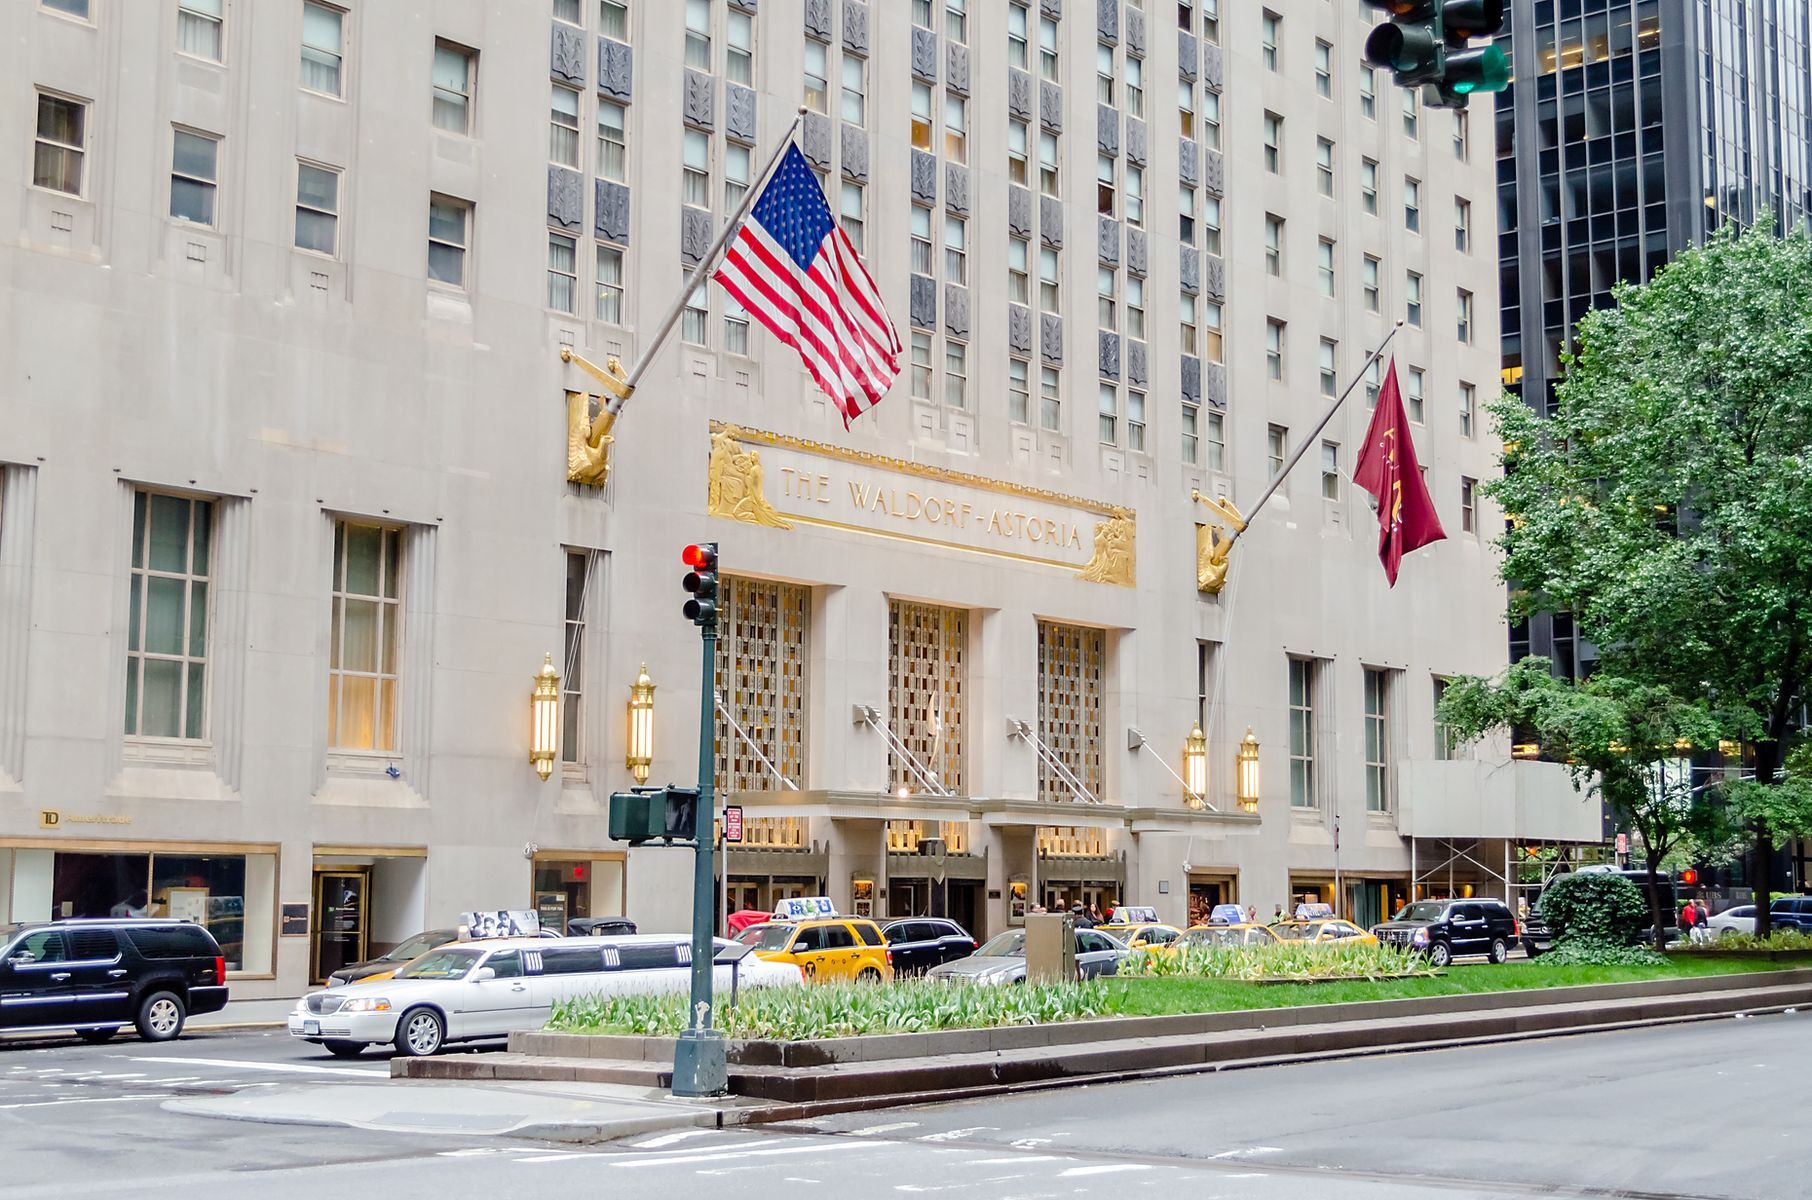 <p>Positioned as the flagship brand within the Hilton portfolio of hotels (which, as we’ve seen, are numerous), Waldorf Astoria is a luxury offering with <a href="https://www.hilton.com/en/locations/waldorf-astoria/" rel="noreferrer noopener">37 hotel and resort locations</a> worldwide in cities such as New York City, Berlin and Rome. Guests are given <a href="https://www.hilton.com/en/brands/waldorf-astoria/">a personal concierge and a curated experience</a> during their stay.</p>